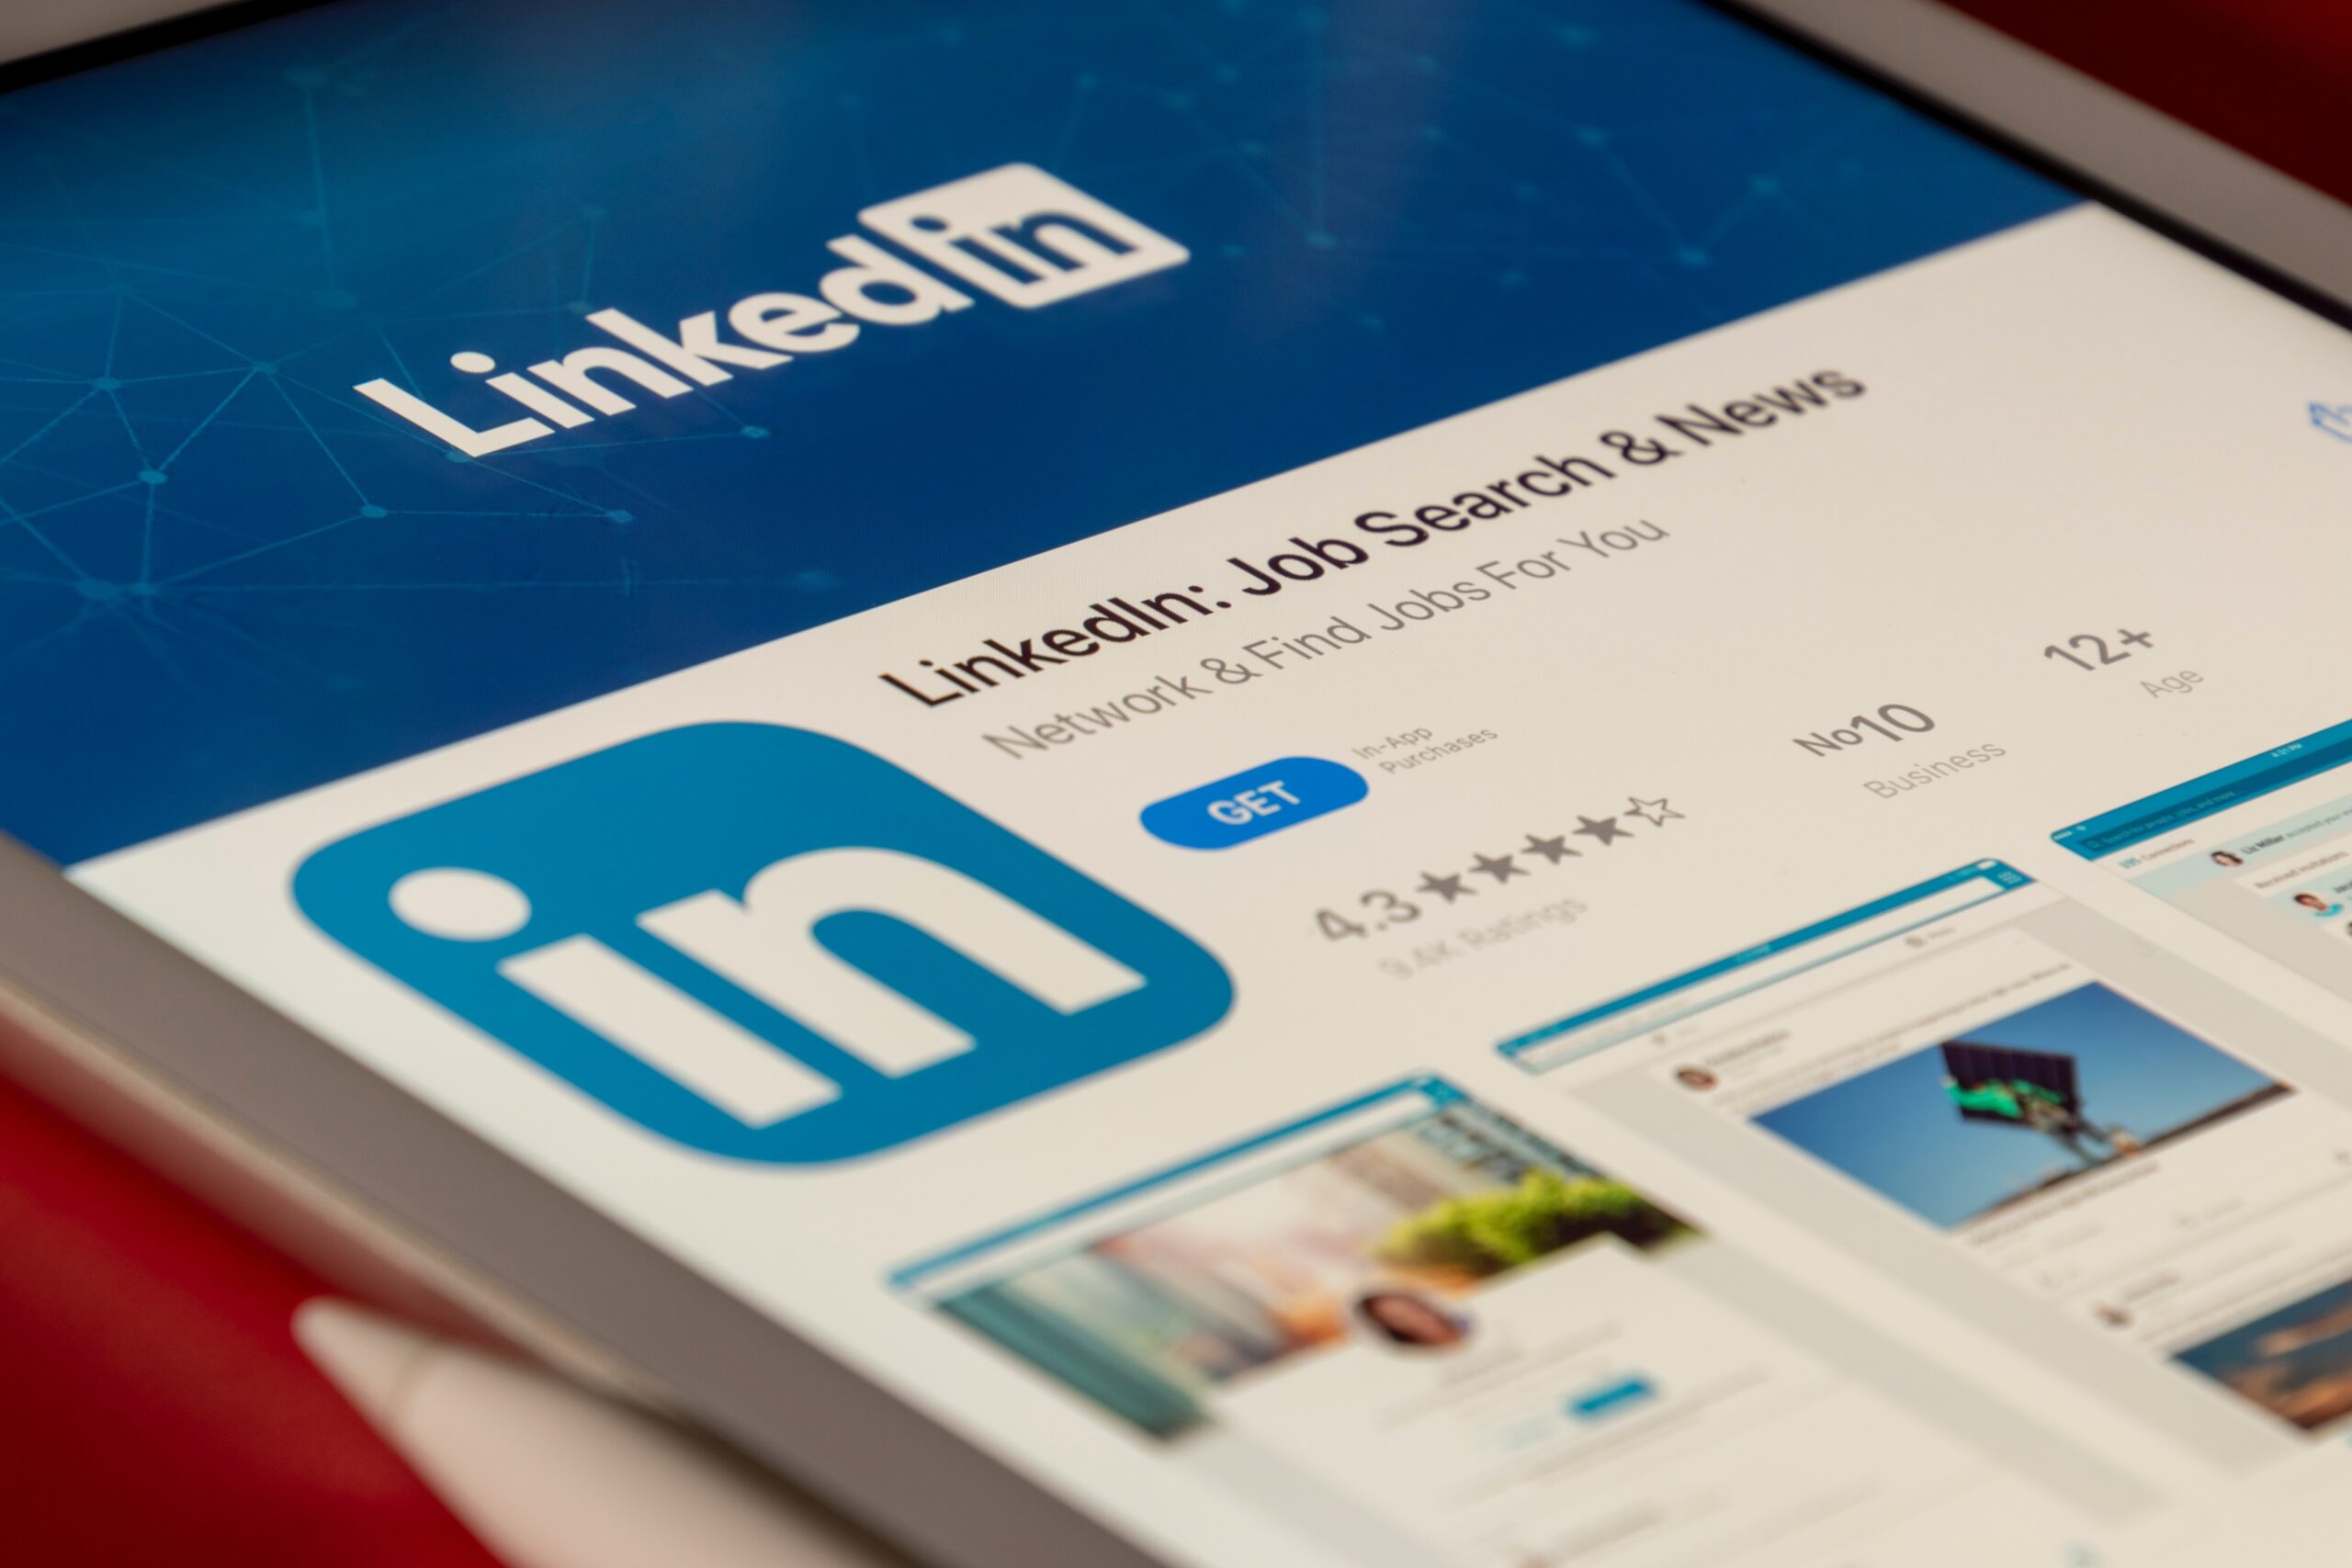 How to delete your LinkedIn account?